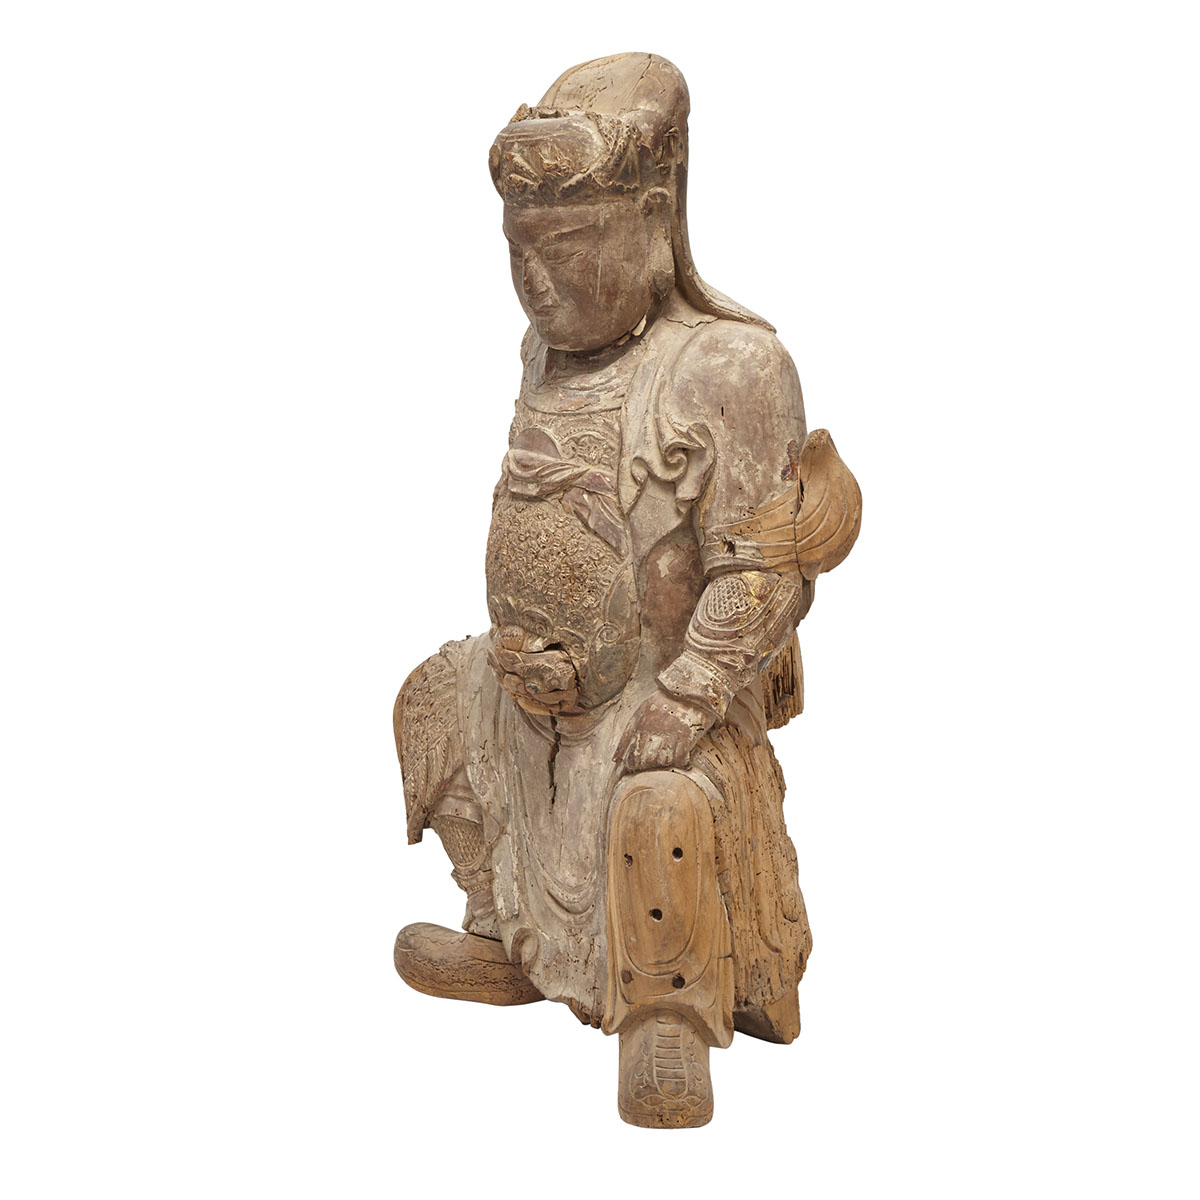 A Finely Carved Wood Figure of Guandi, Qing Dynasty (1644-1911)